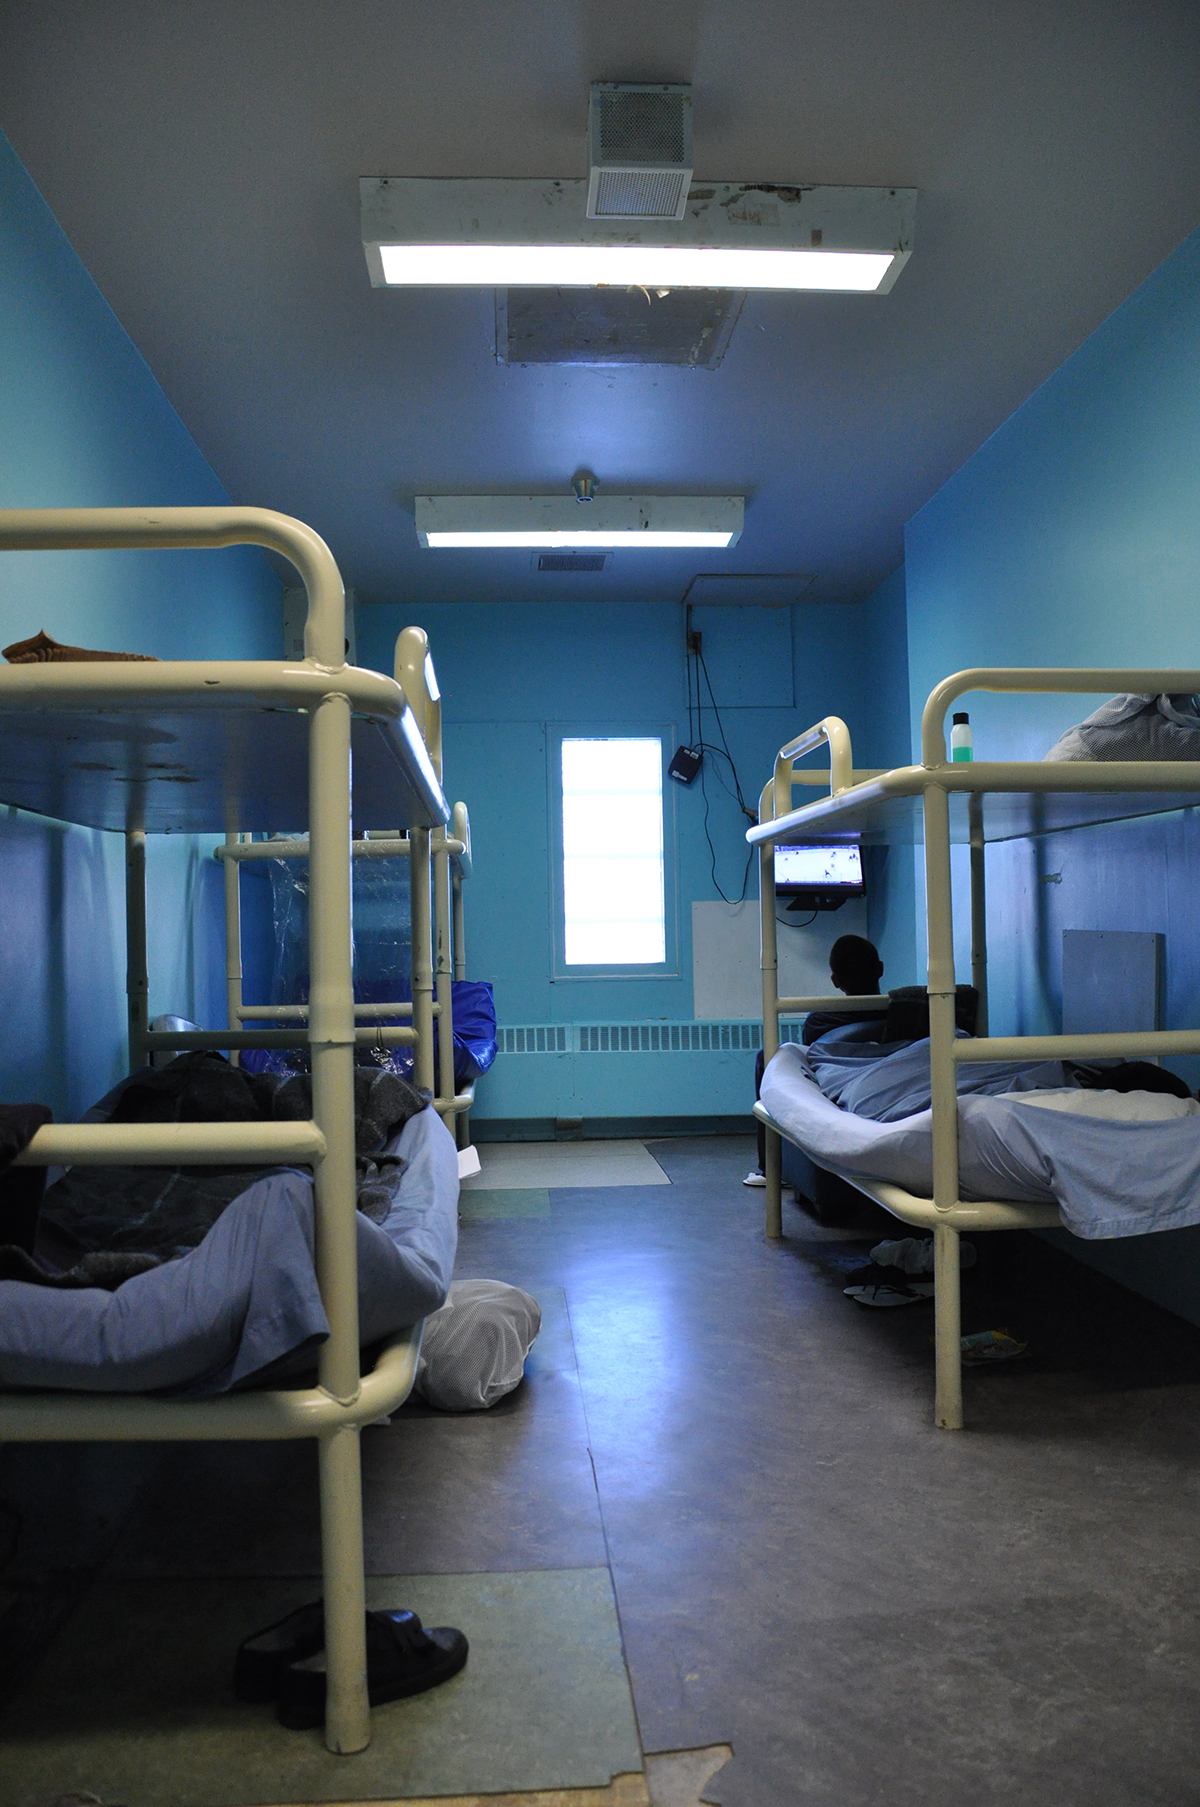 A cell at Baffin Correctional Centre, where four inmates allegedly caused 